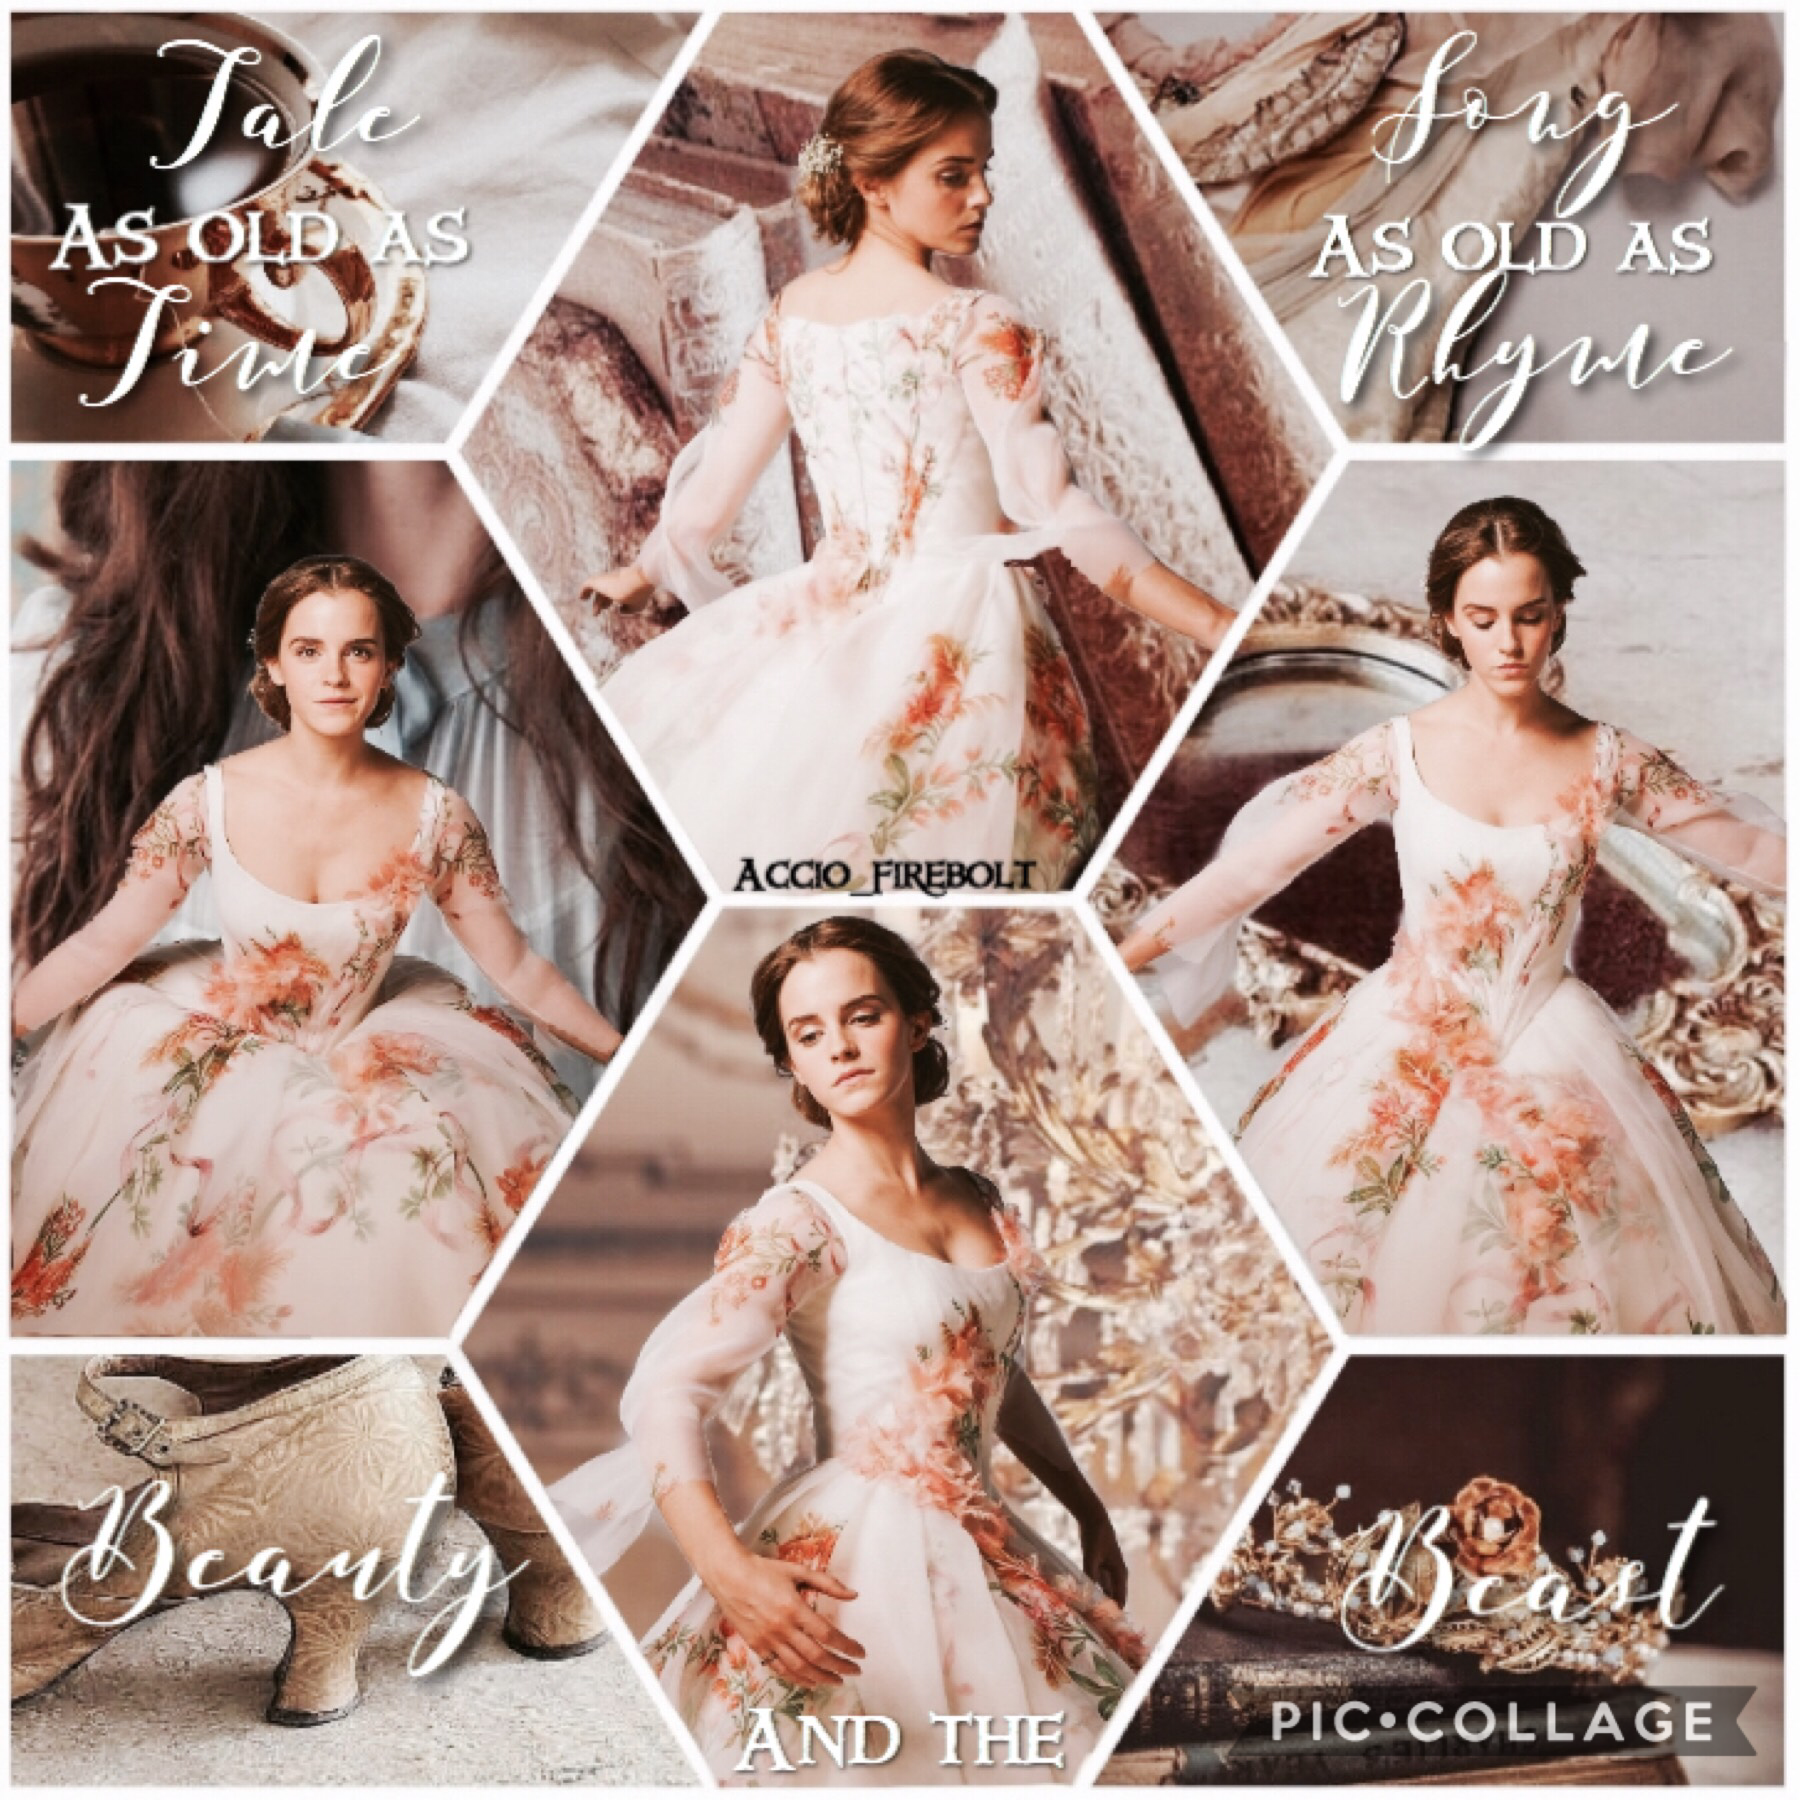 Another Emma Watson edit! Found these pics of her and was instantly obsessed!